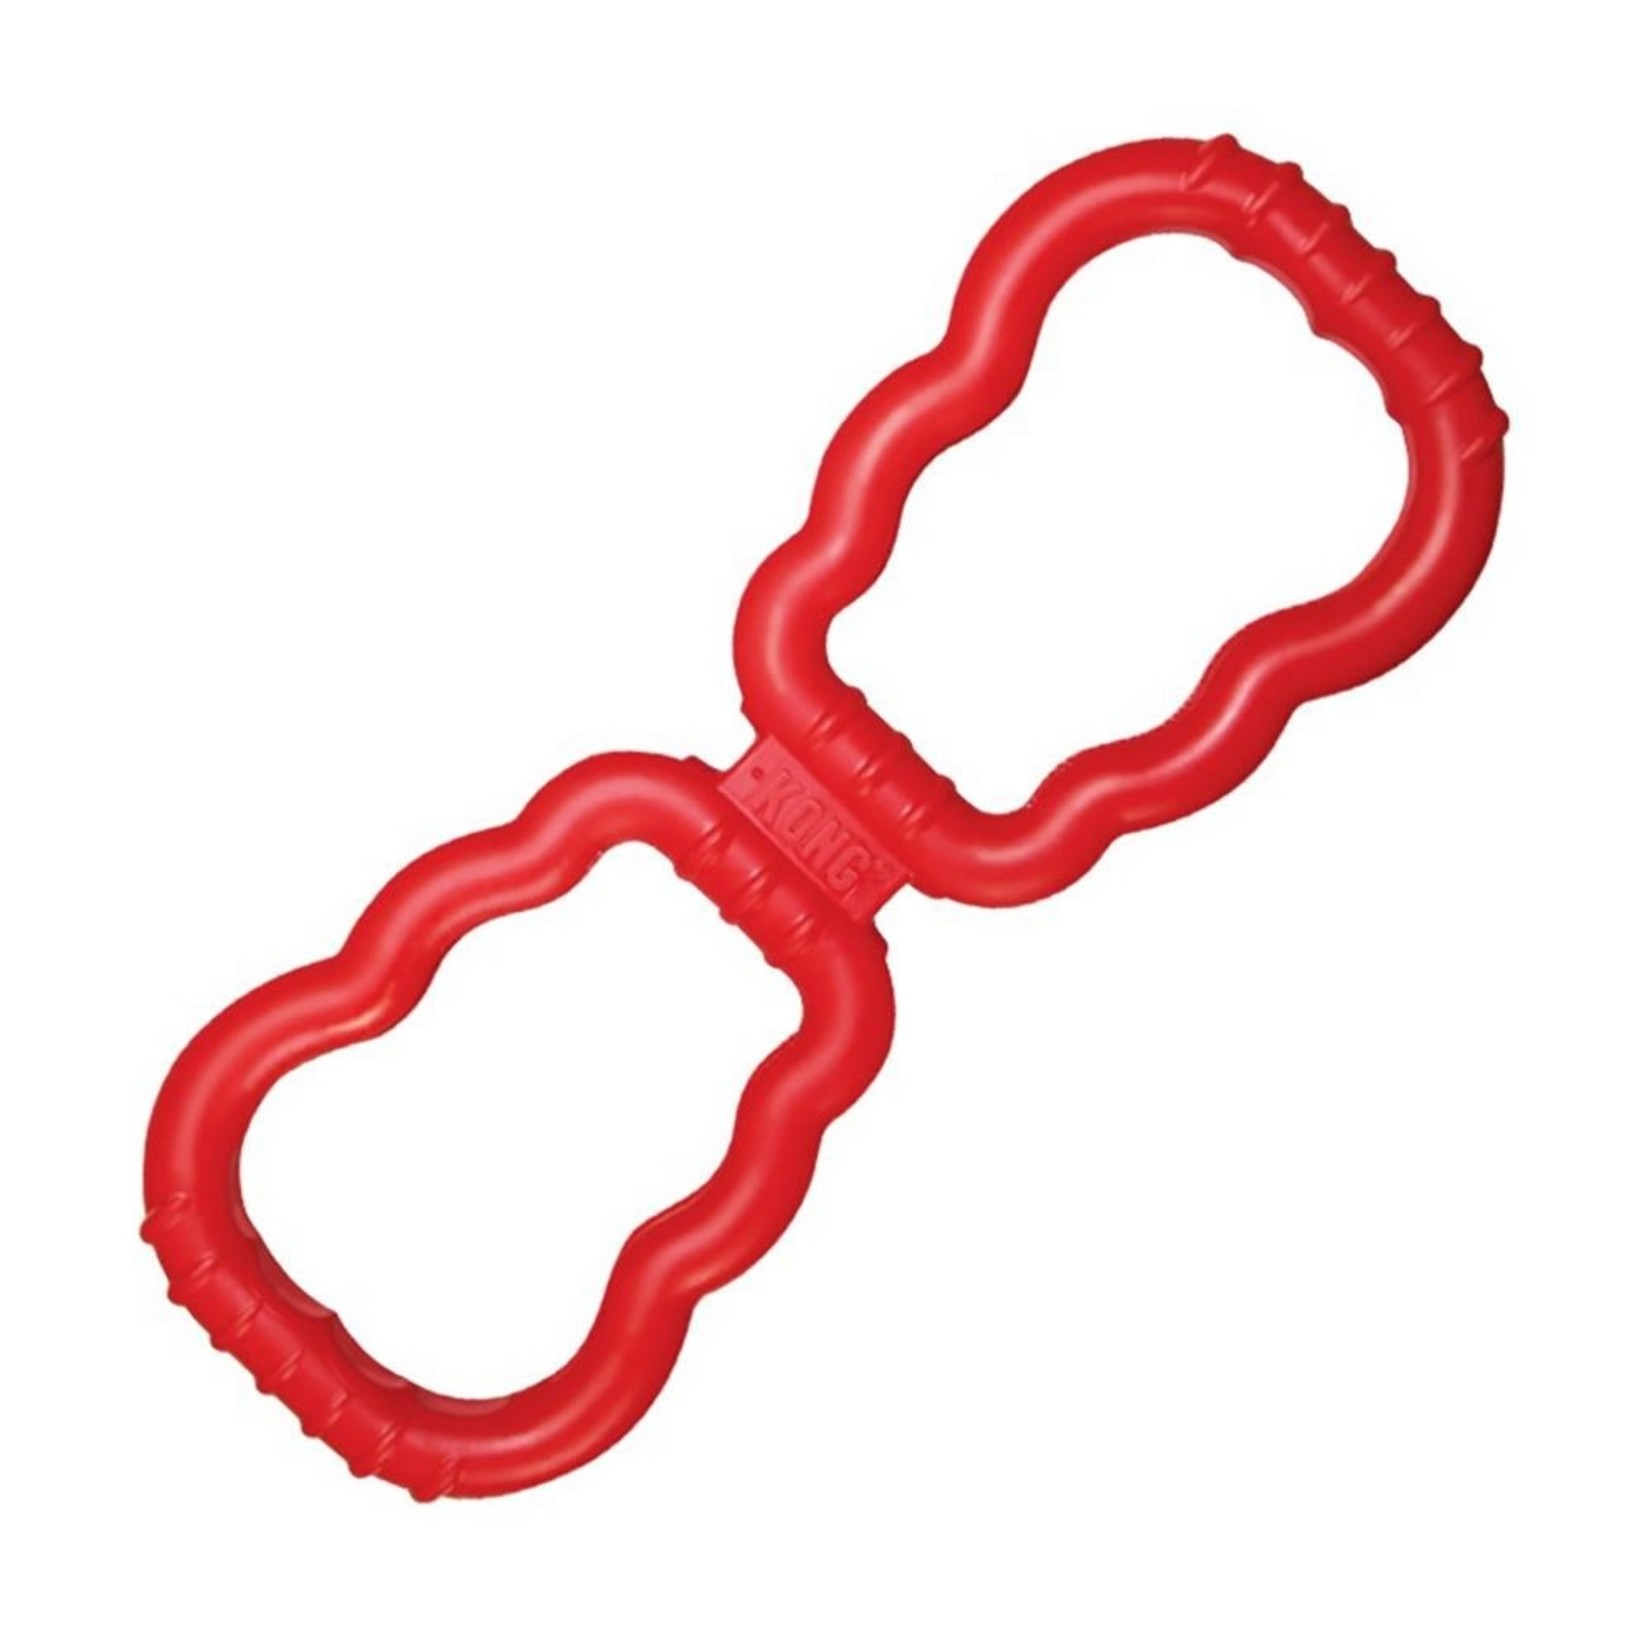 KONG Tug Toy Rubber Dog Toy